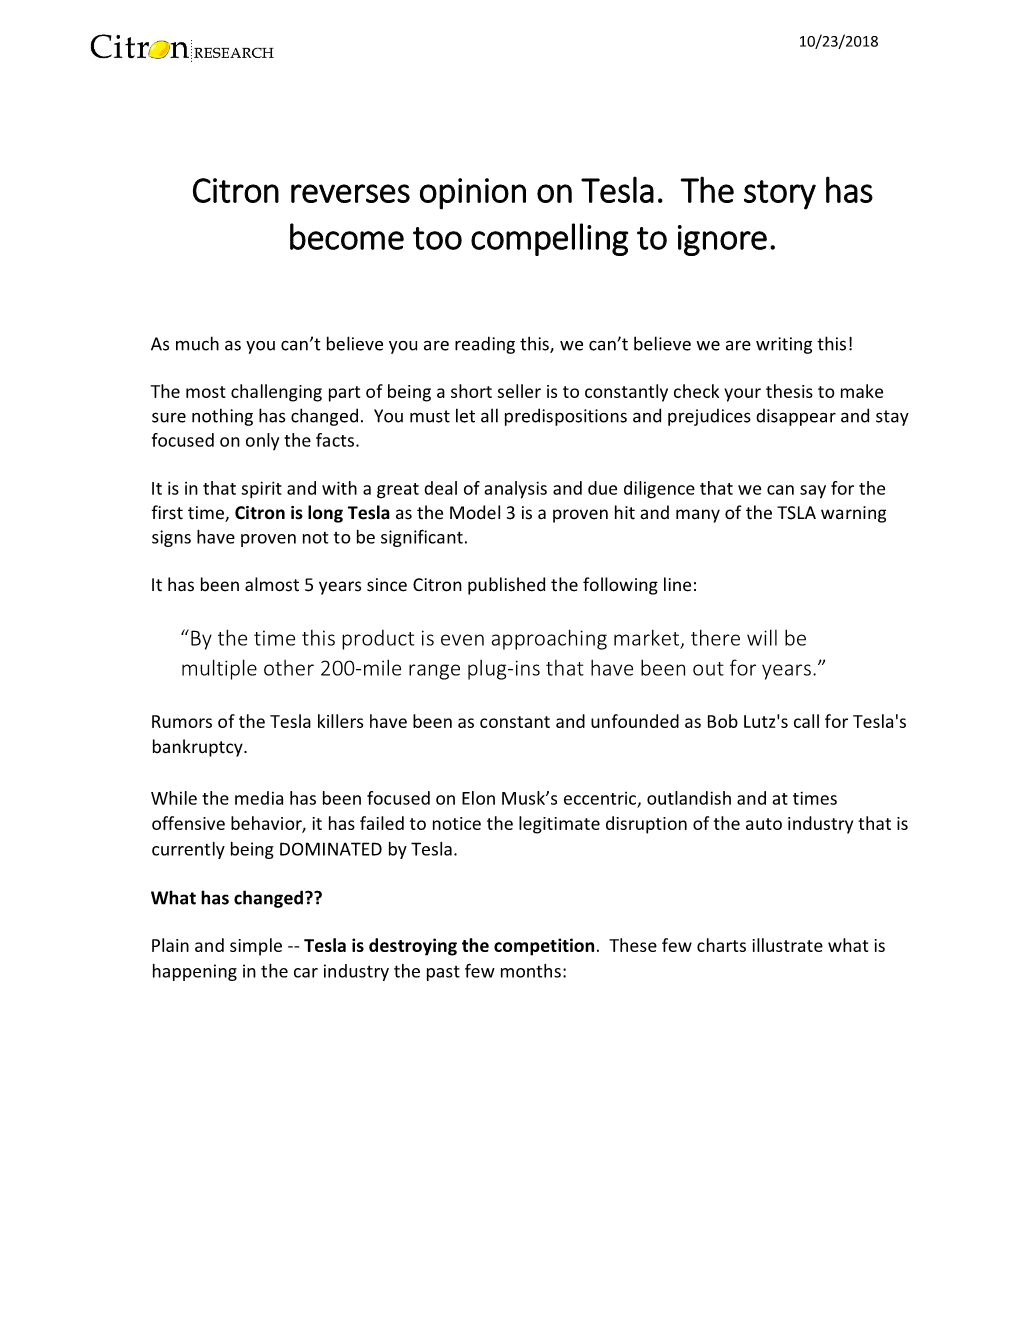 Citron Reverses Opinion on Tesla. the Story Has Become Too Compelling to Ignore